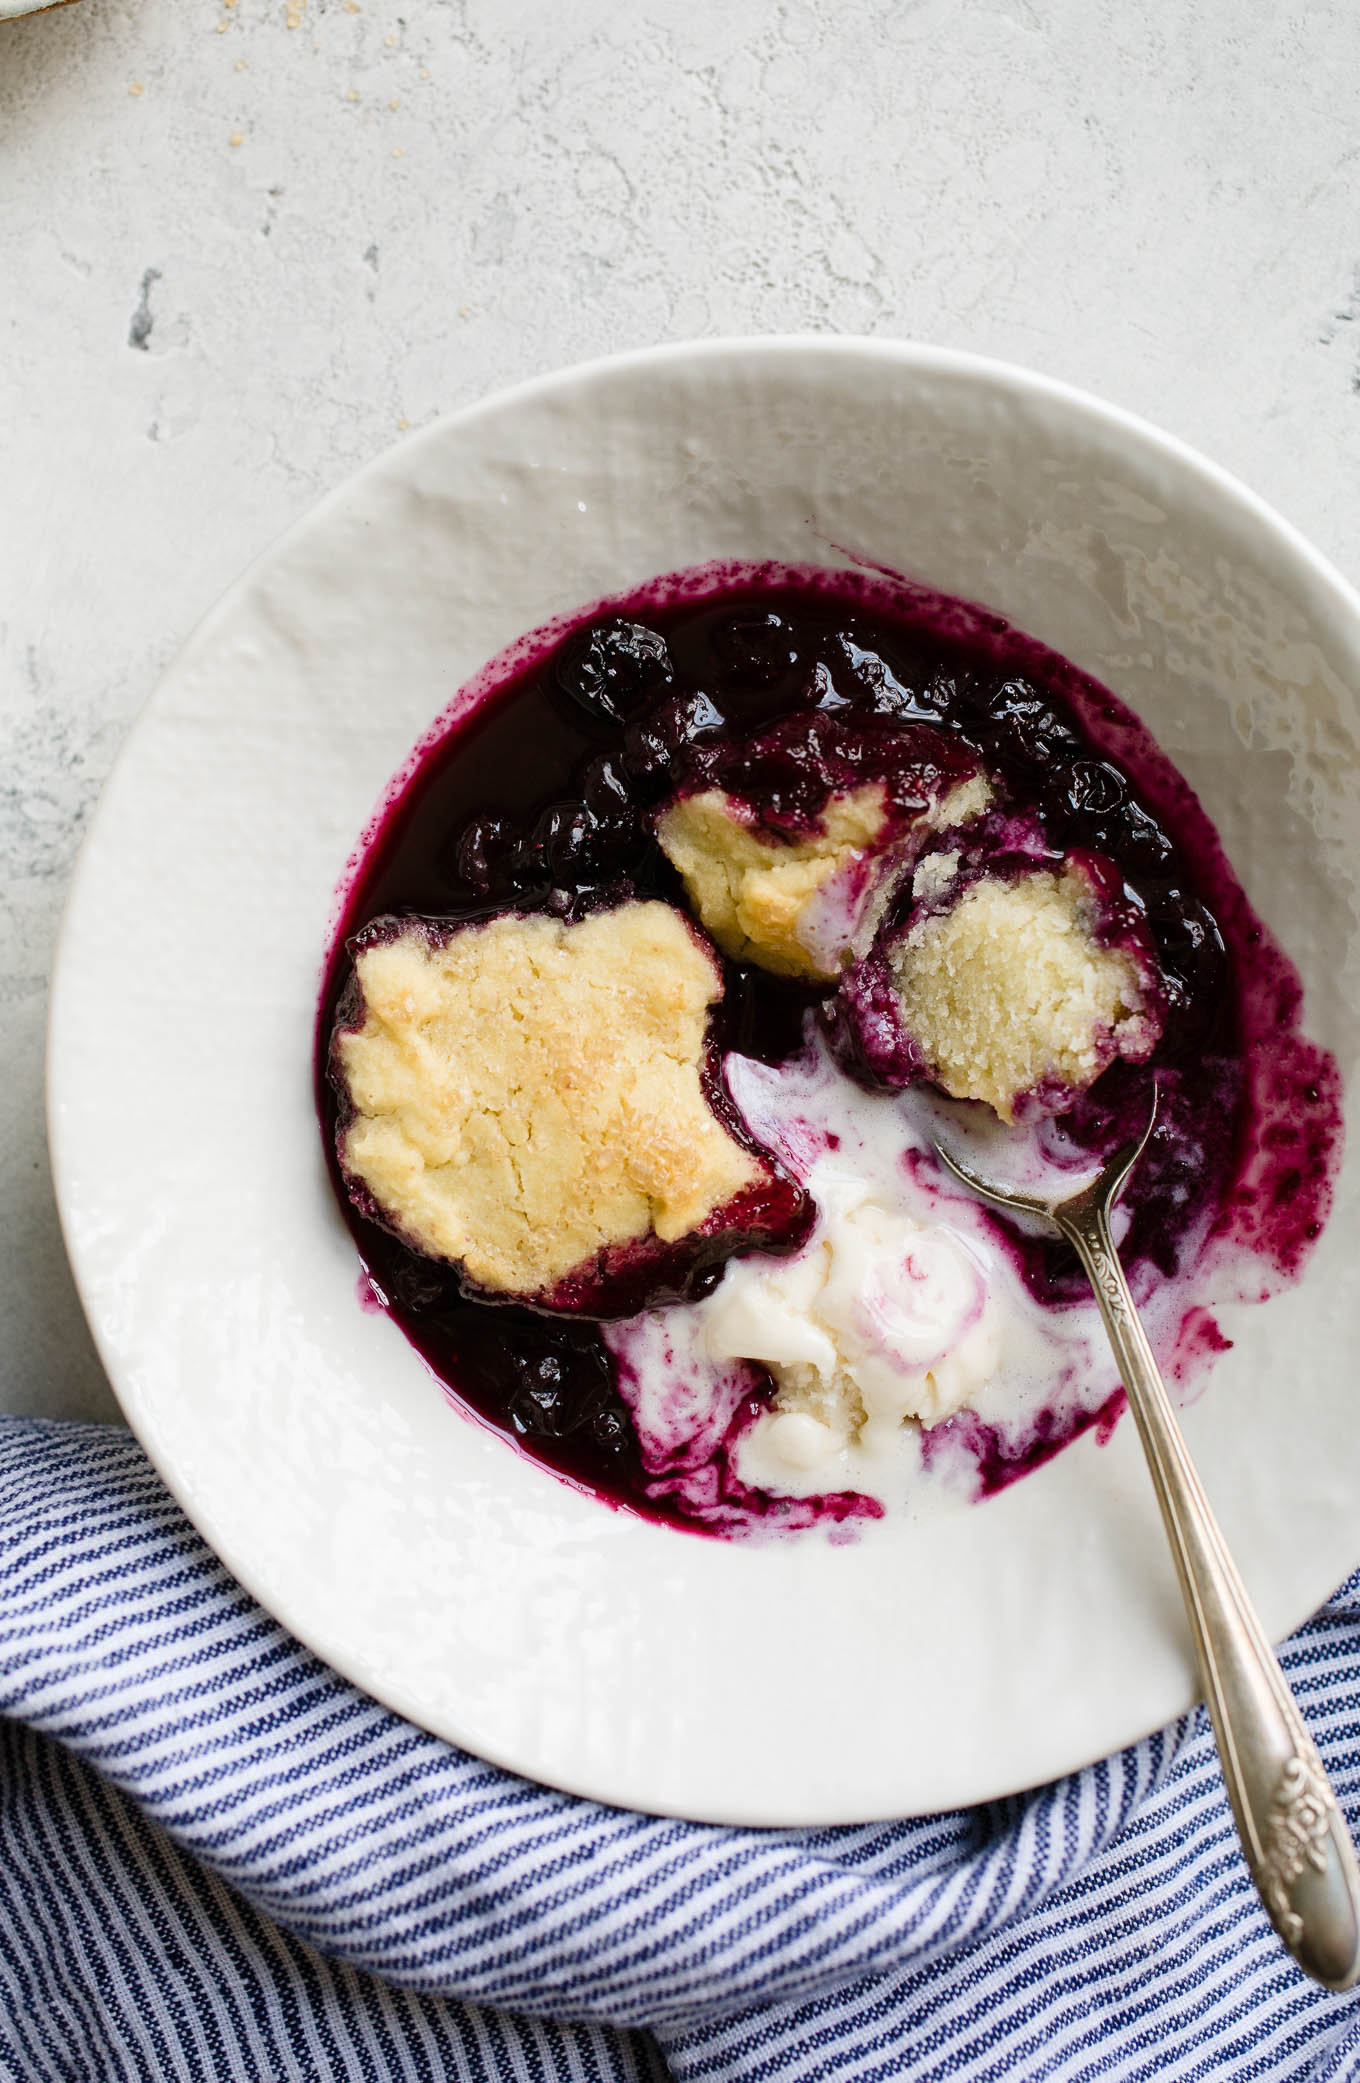 Gluten-Free Blueberry Cobbler with Almond Flour Biscuits is loaded with fresh blueberries, a hint of lemon, and topped with soft, lightly sweetened biscuits. A dairy-free and vegan cobbler recipe.